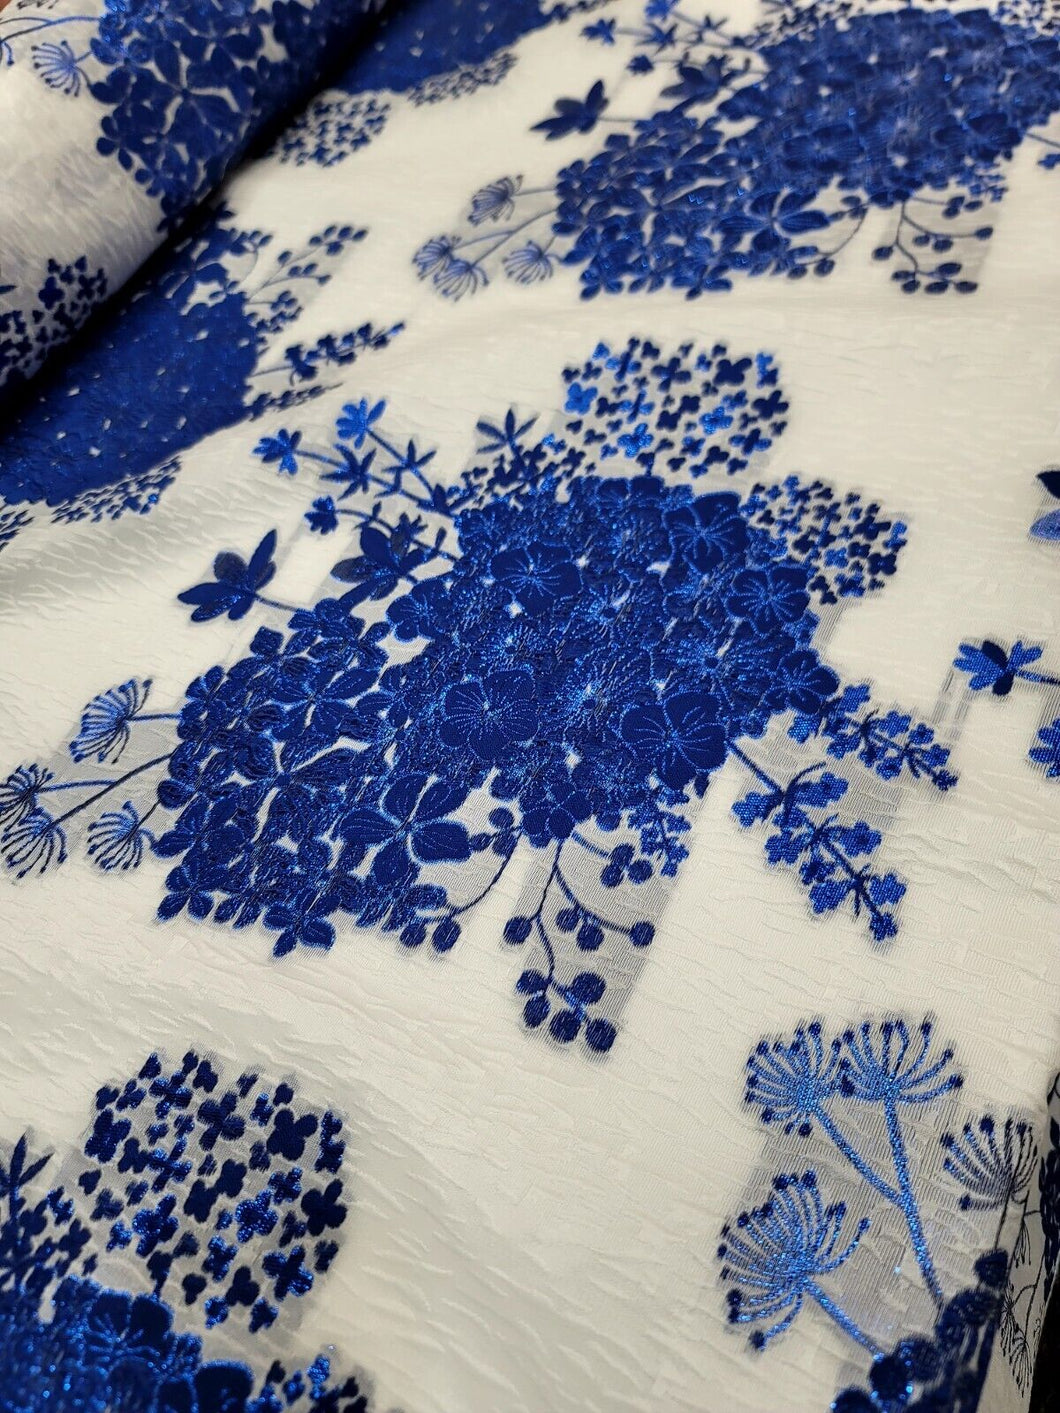 ROYAL BLUE Floral Brocade Fabric Sold By The Yard WHITE FRENCH ORGANZA BRIDAL